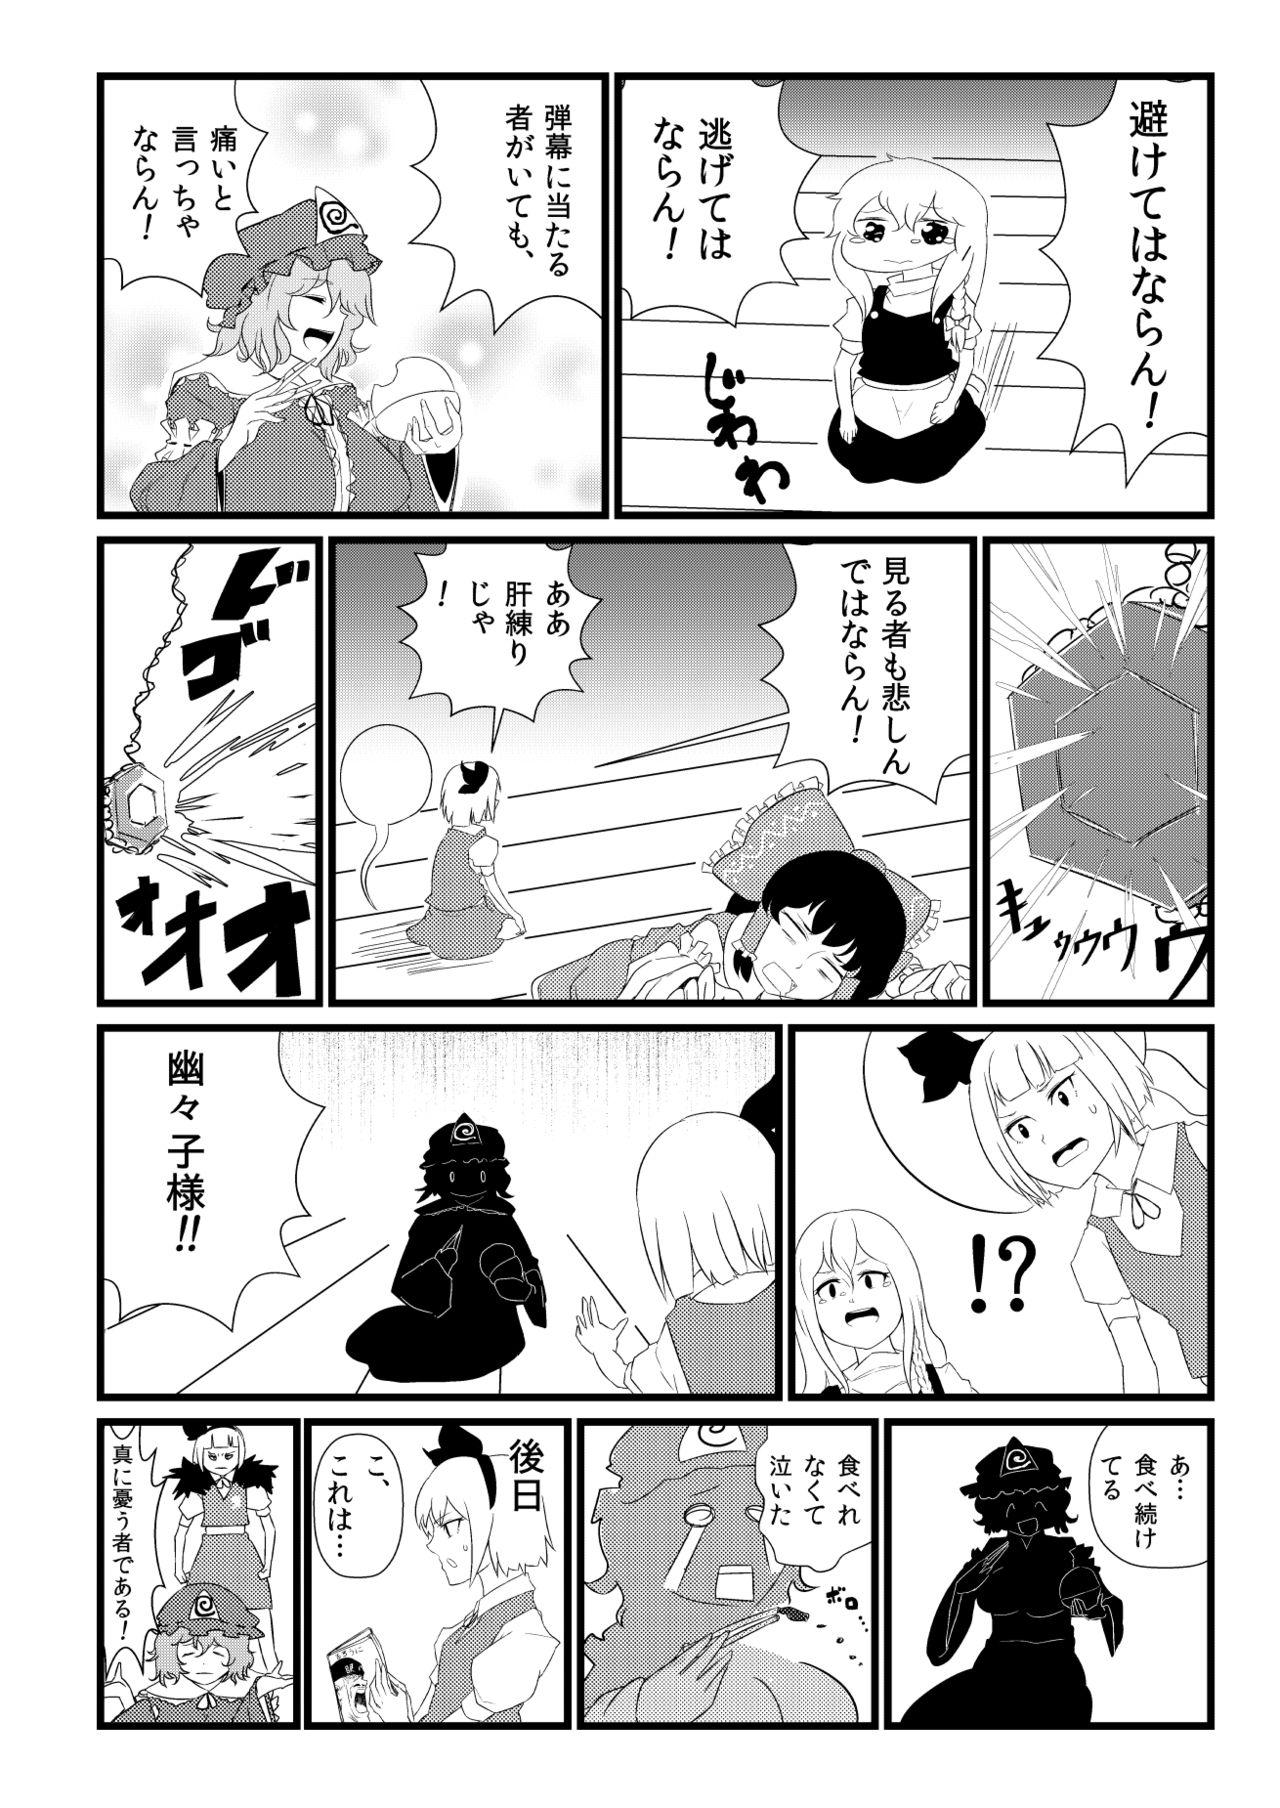 Sloppy Blowjob 東方板としあき合同誌5 - Touhou project Chilena - Page 4